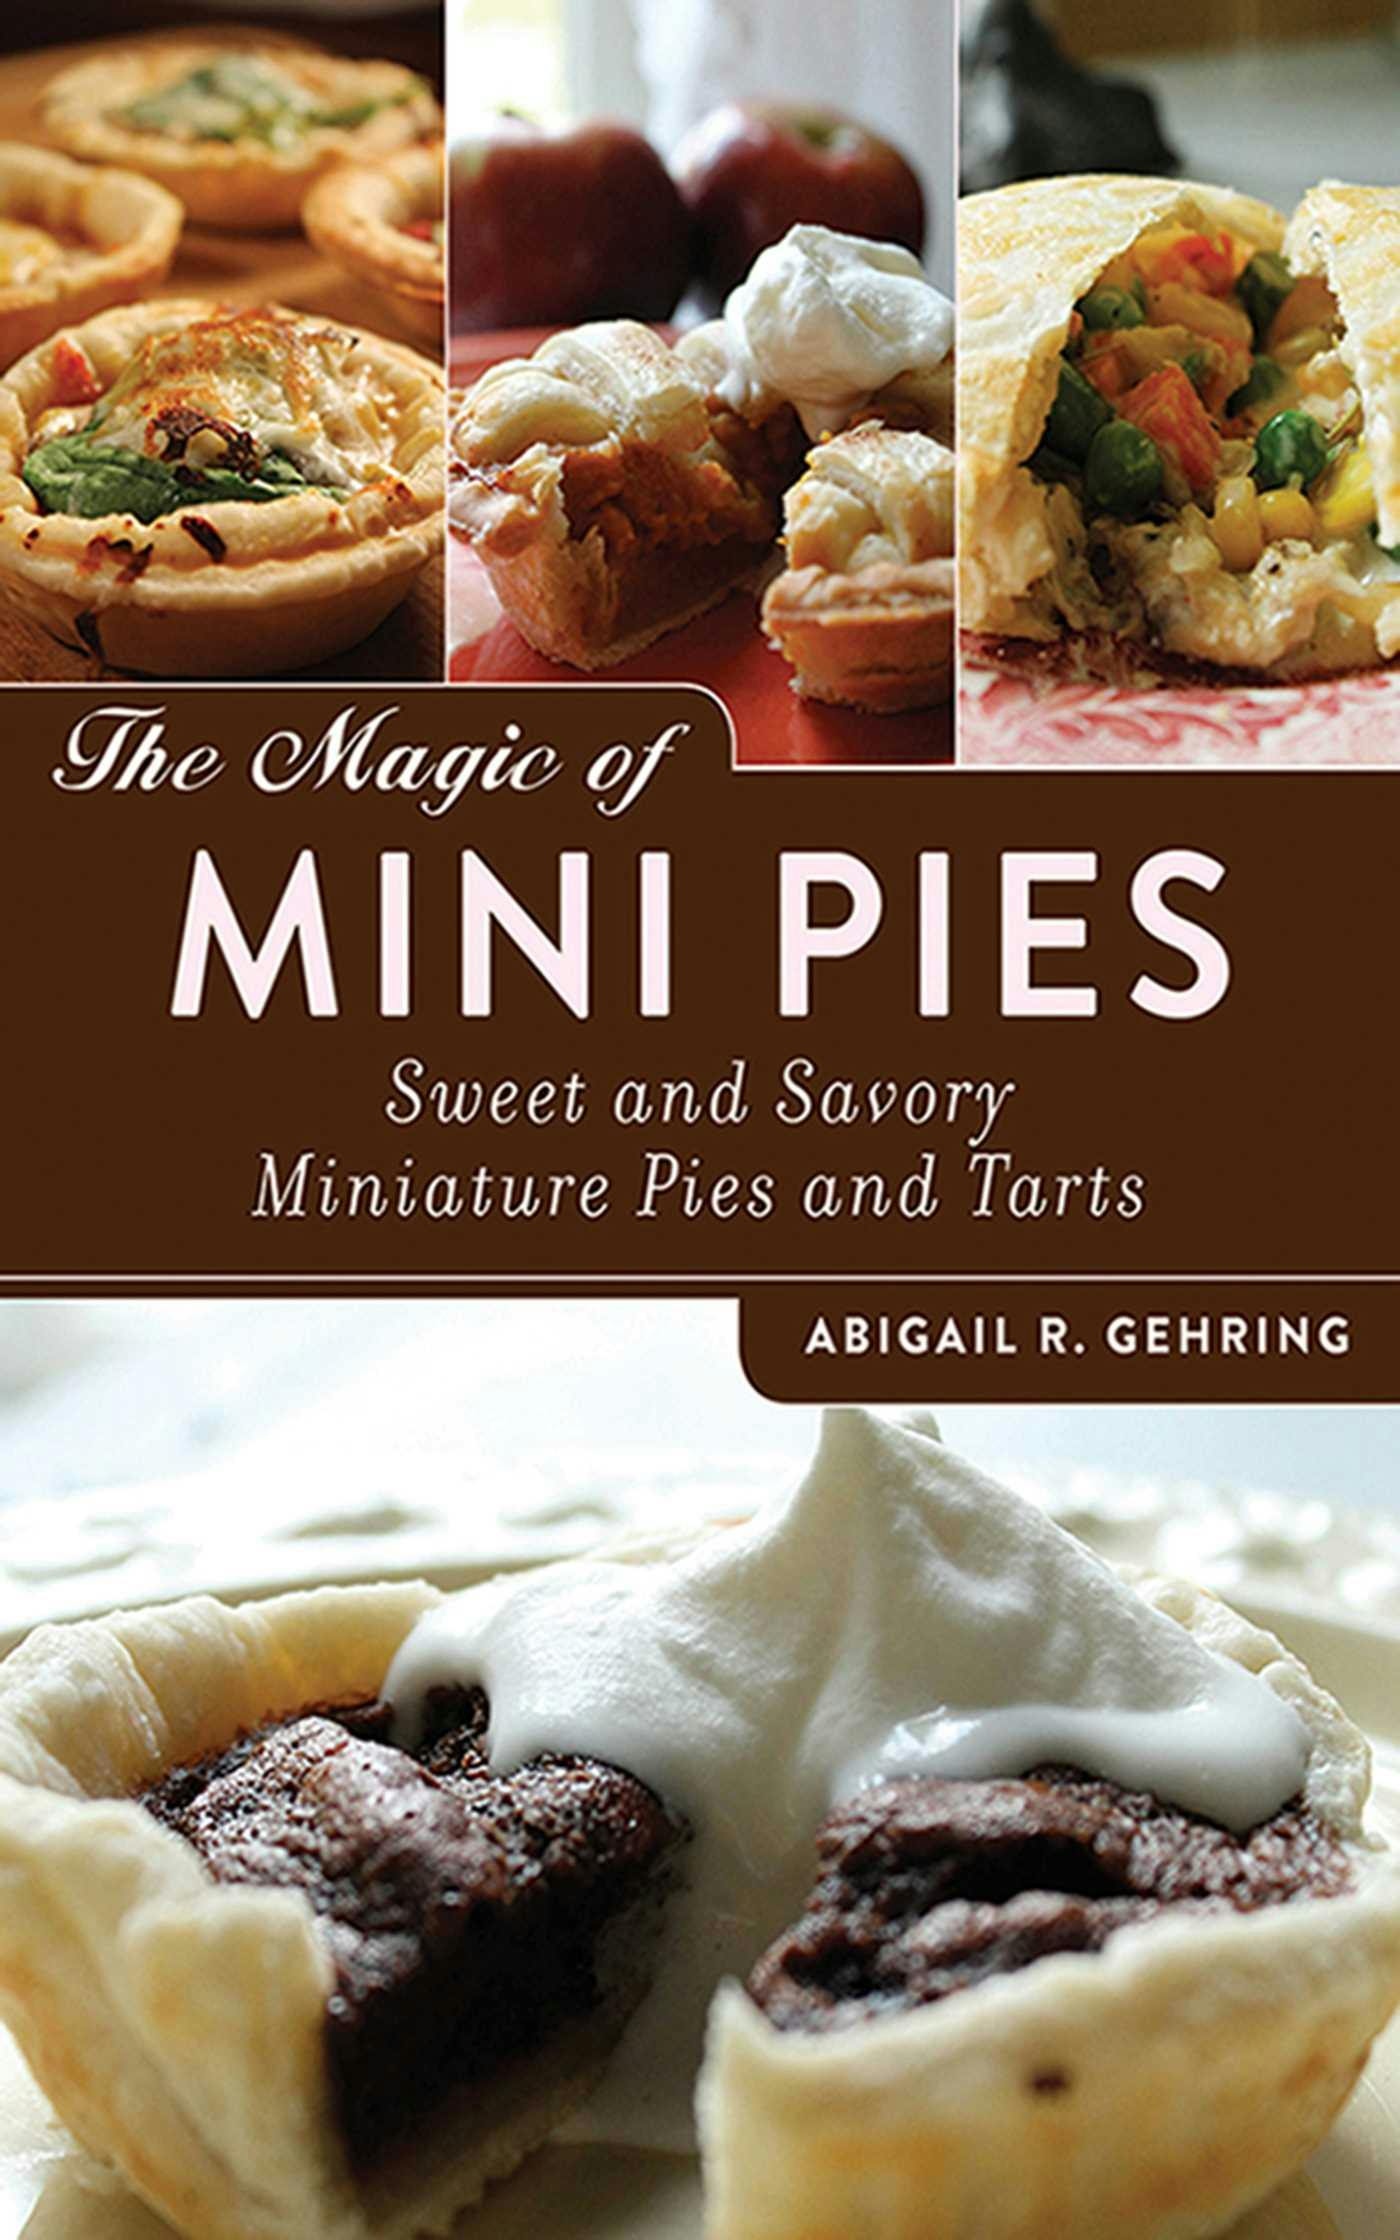 The Magic of Mini Pies: Sweet and Savory Miniature Pies and Tarts - Abigail Gehring